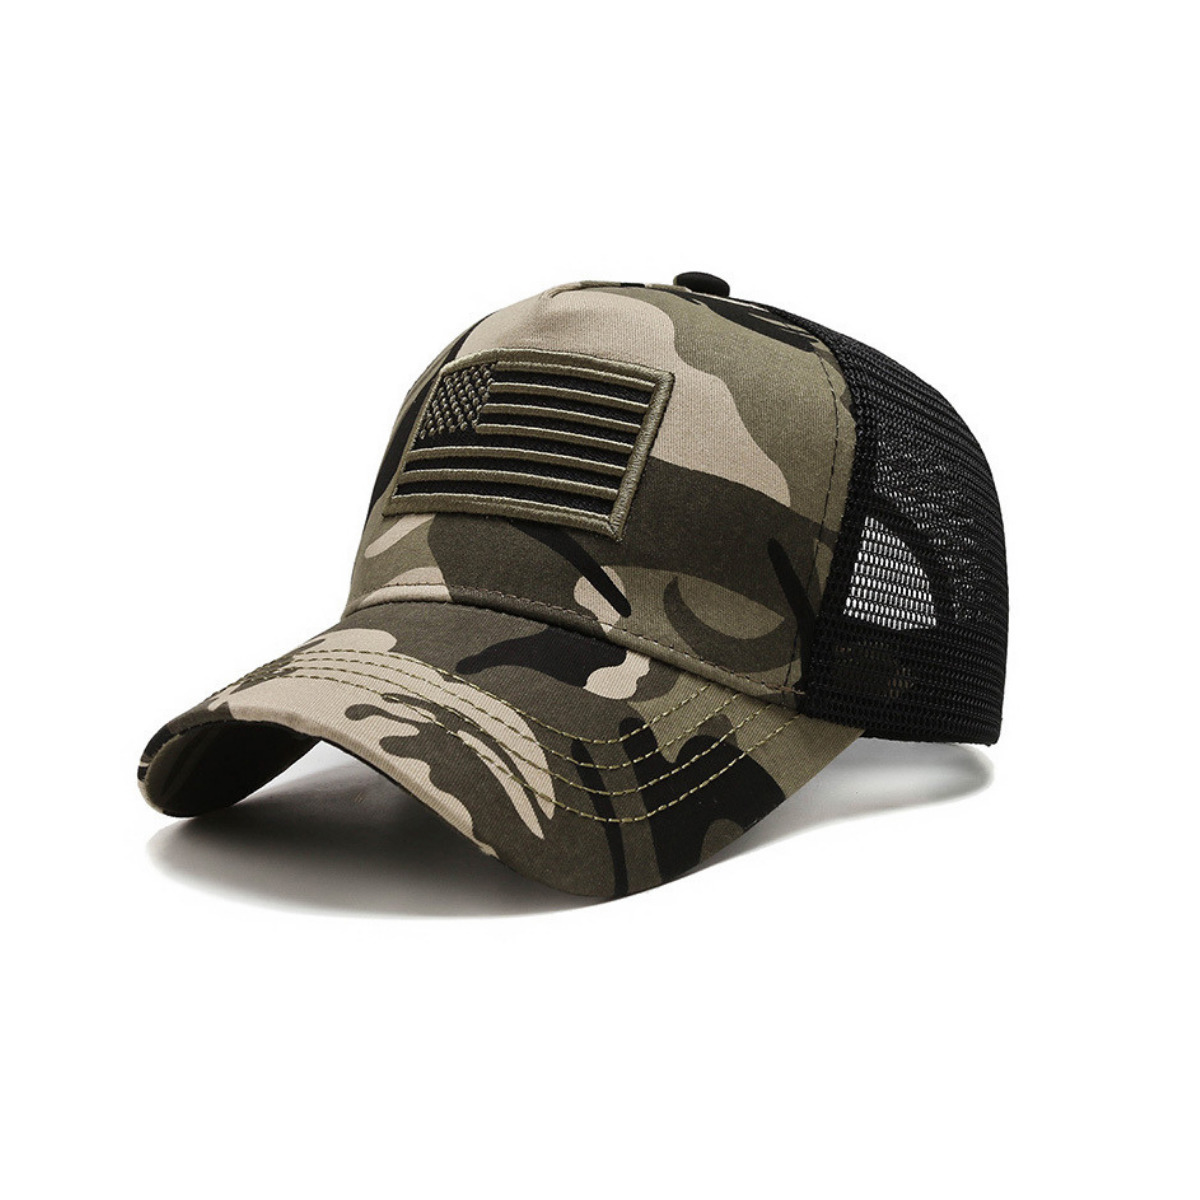 American Flag Trucker Hat With Adjustable Strap - Camo-Green Flag